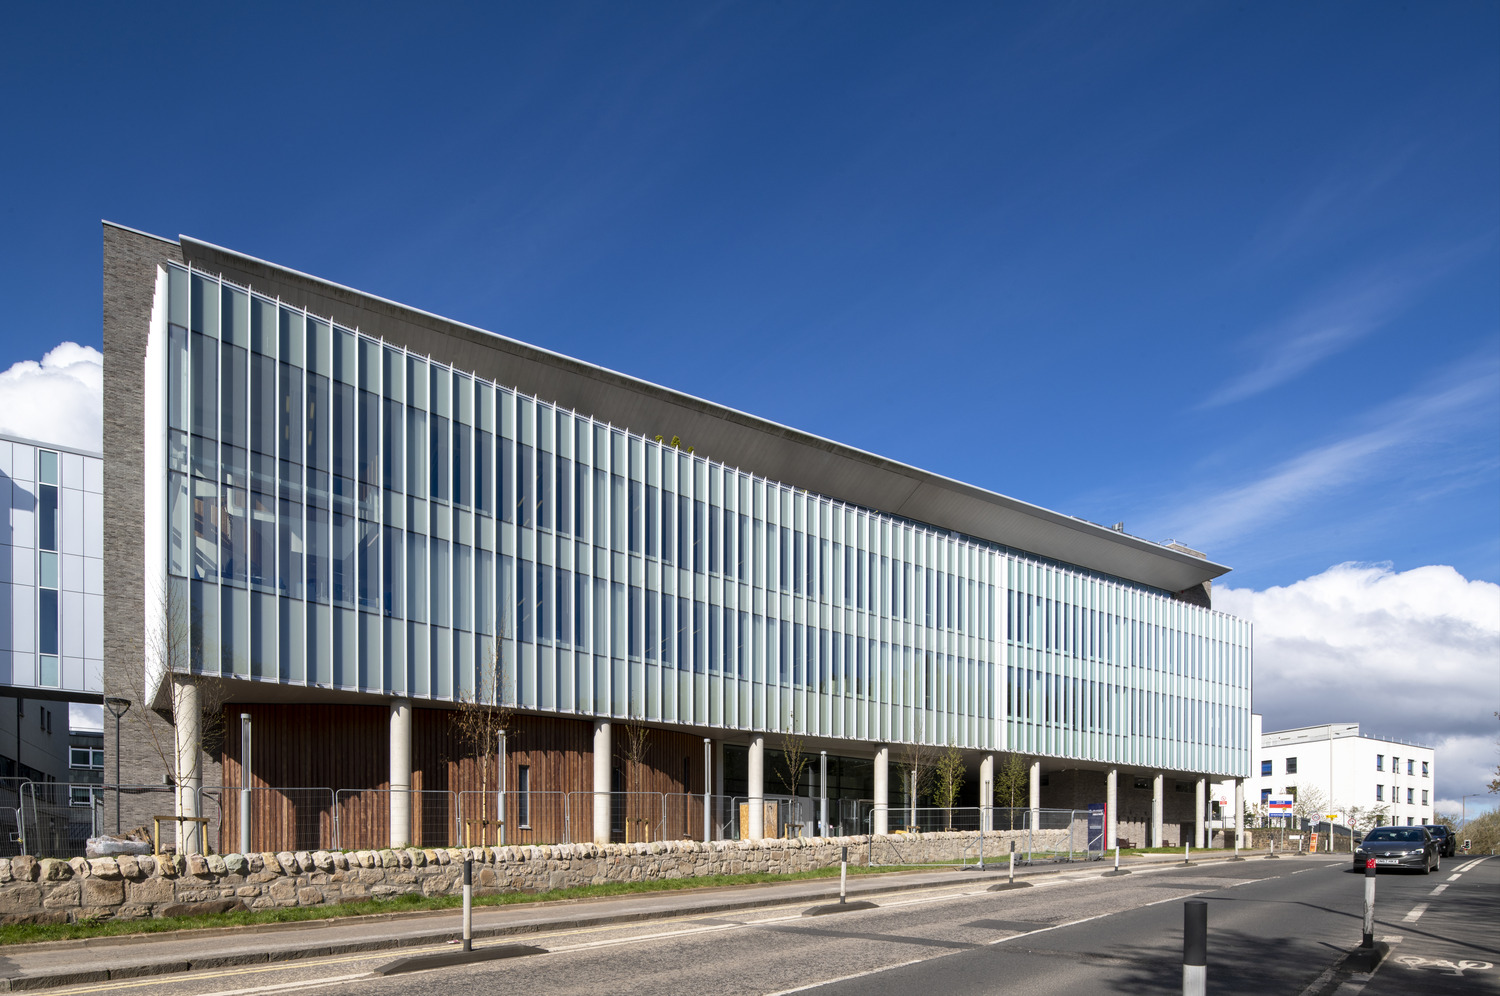 University of Edinburgh’s Institute of Genetics and Cancer completed by Robertson